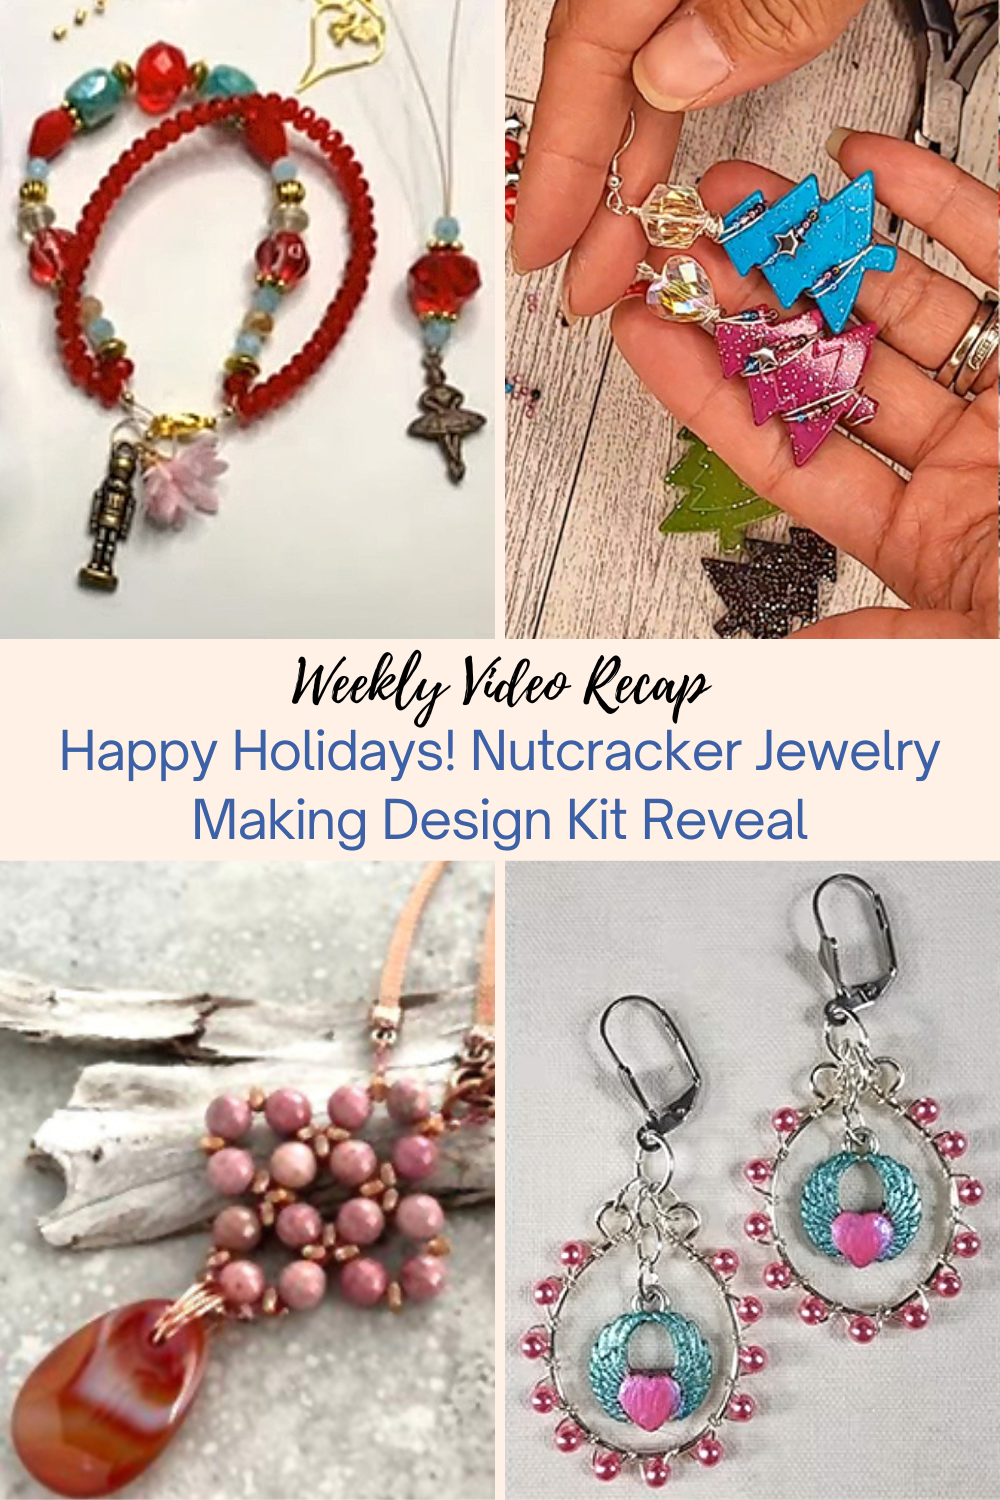 Happy Holidays! Nutcracker Jewelry Making Design Kit Reveal Collage